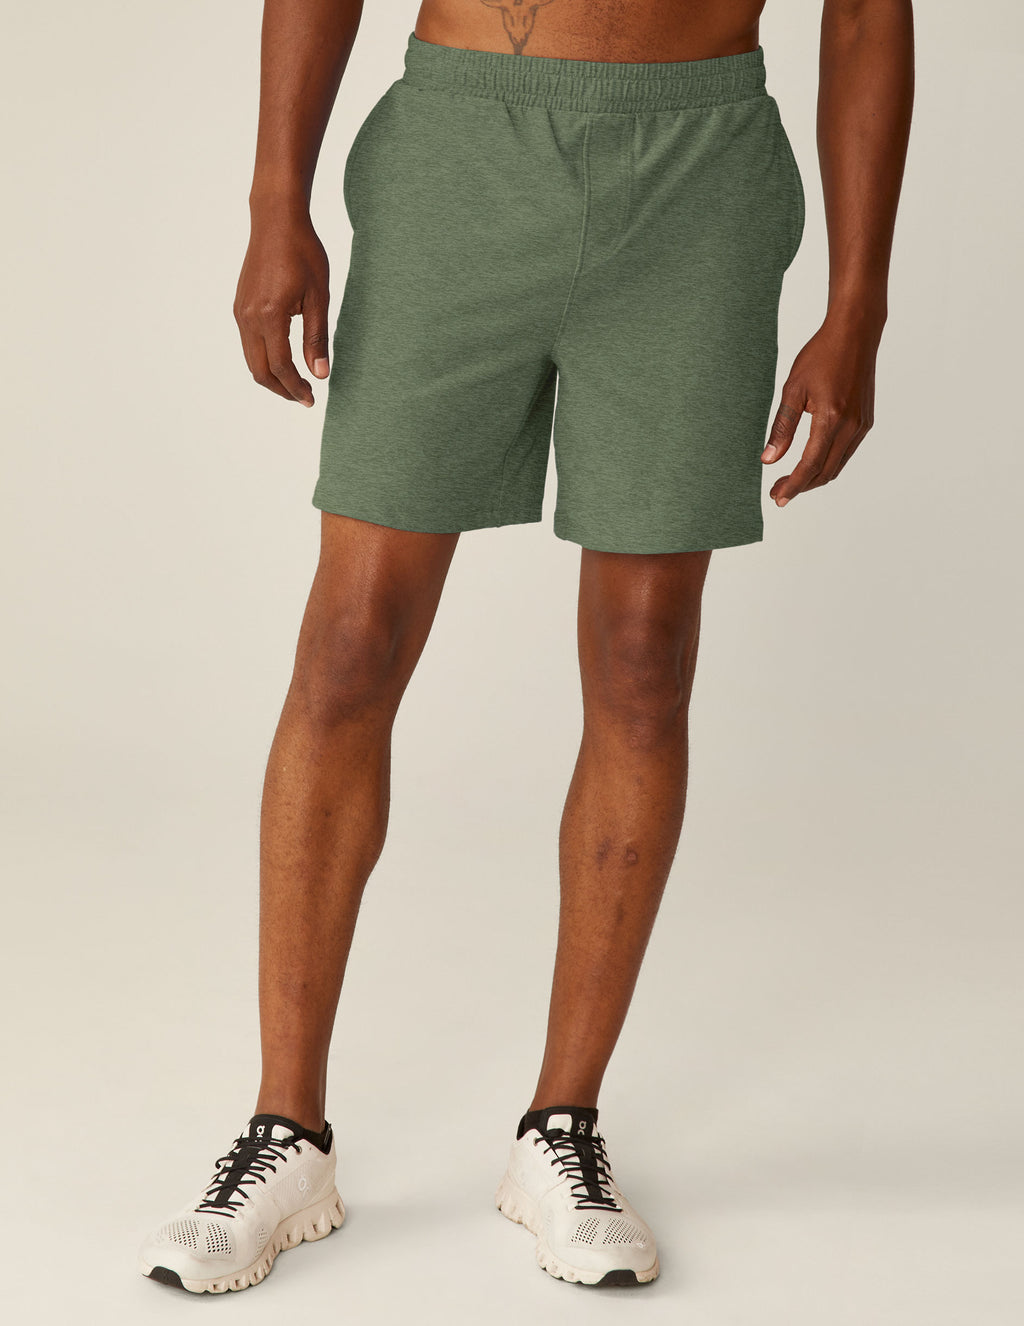 Spacedye Take It Easy Mens Short Featured Image